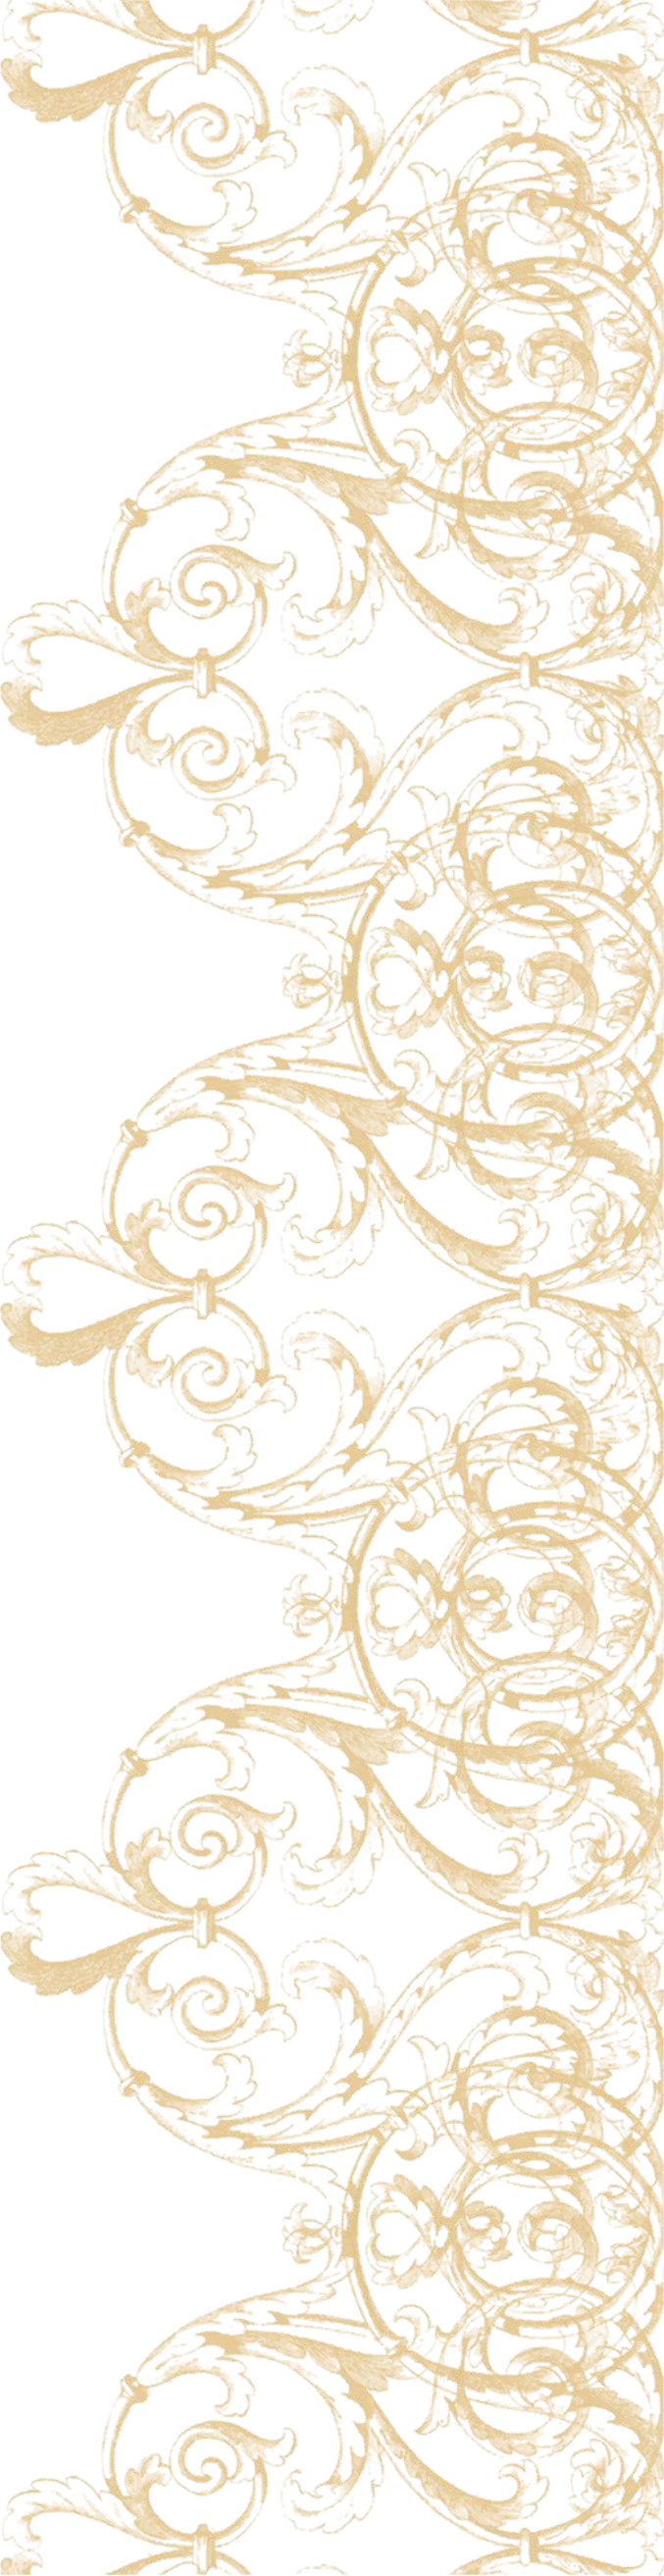 Free Vintage Lace Cliparts, Download Free Clip Art, Free